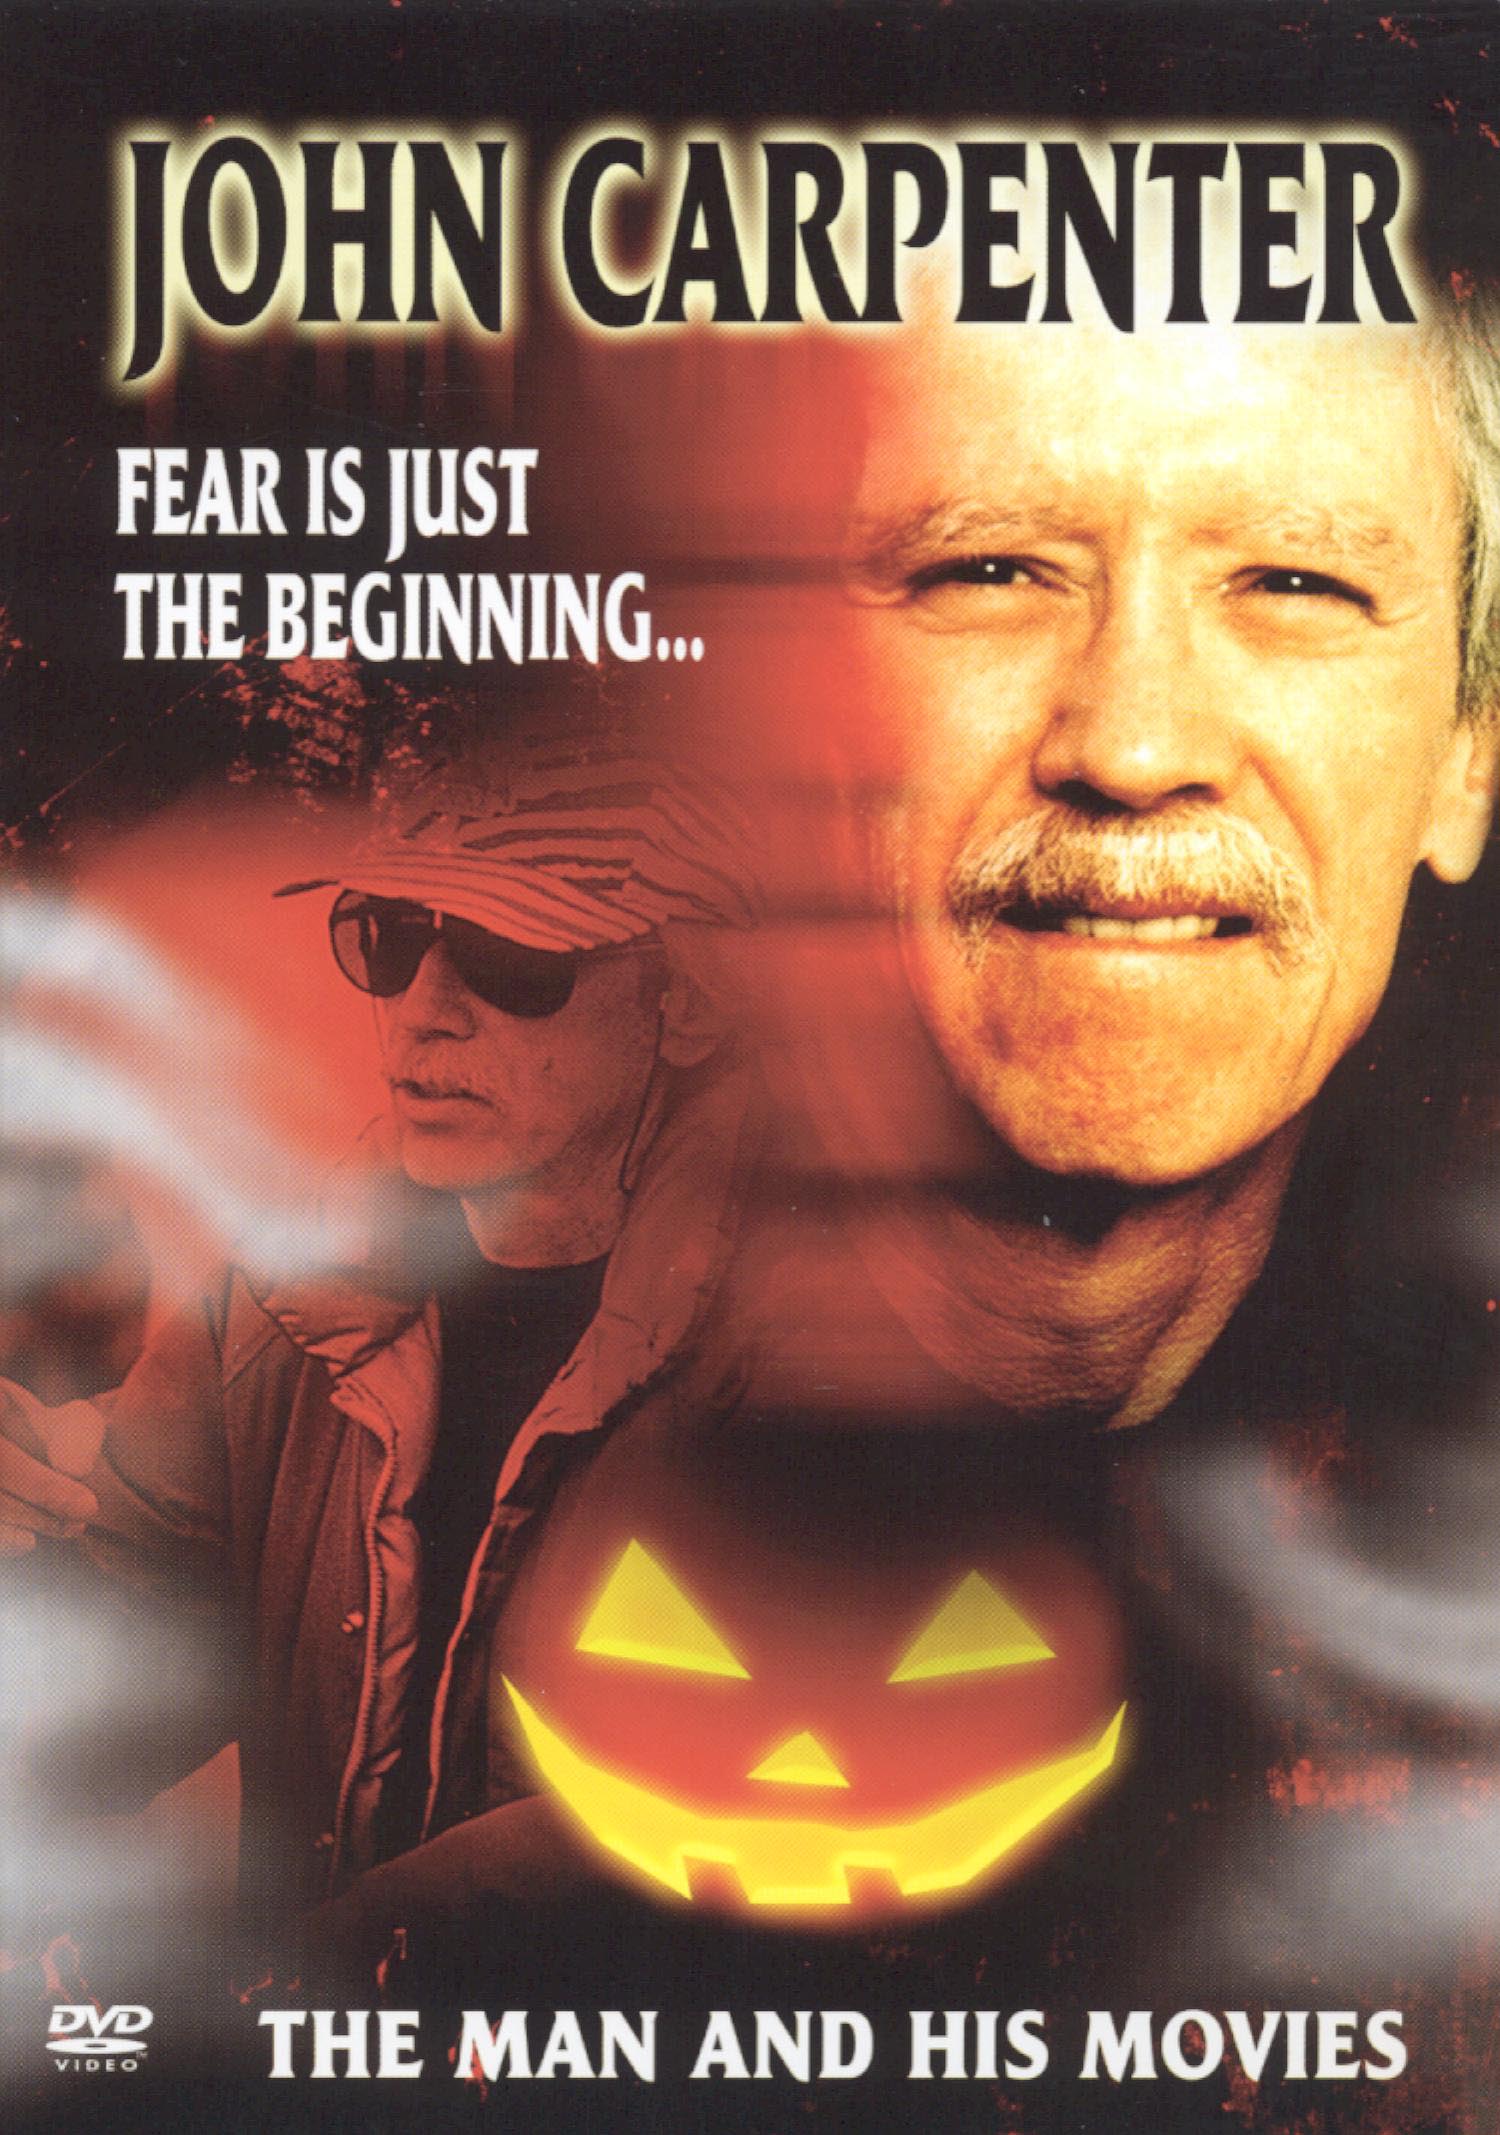 John Carpenter: Fear Is Just the Beginning... The Man and His Movies (2004) Screenshot 1